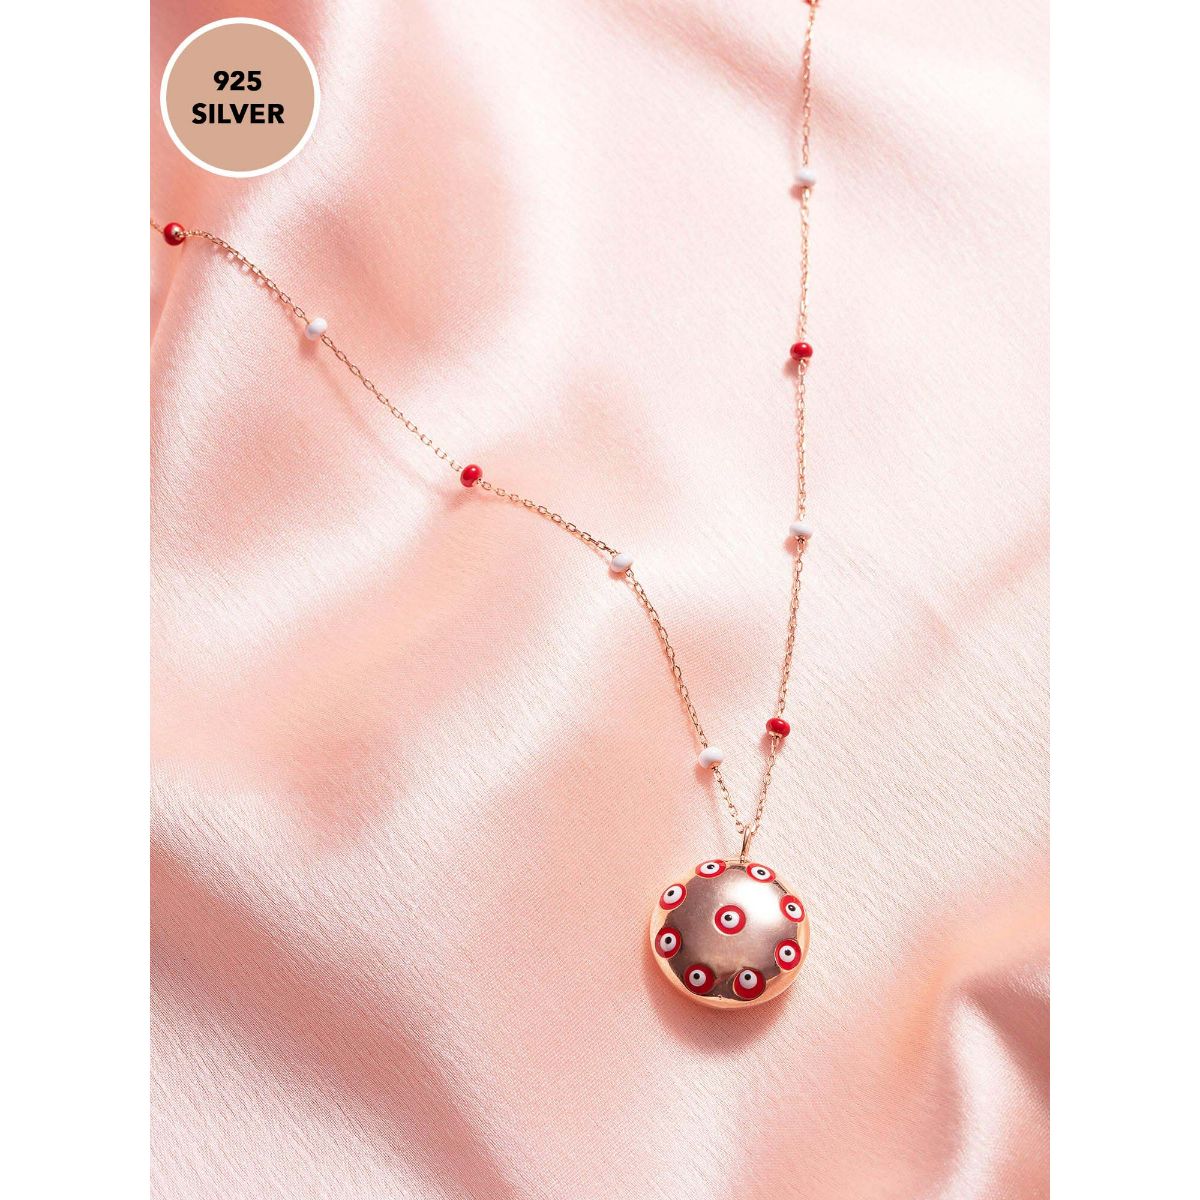 Dew by PB Sterling Silver Rose Gold Toned Red Evil Eye Embellished Round Pendant Necklace